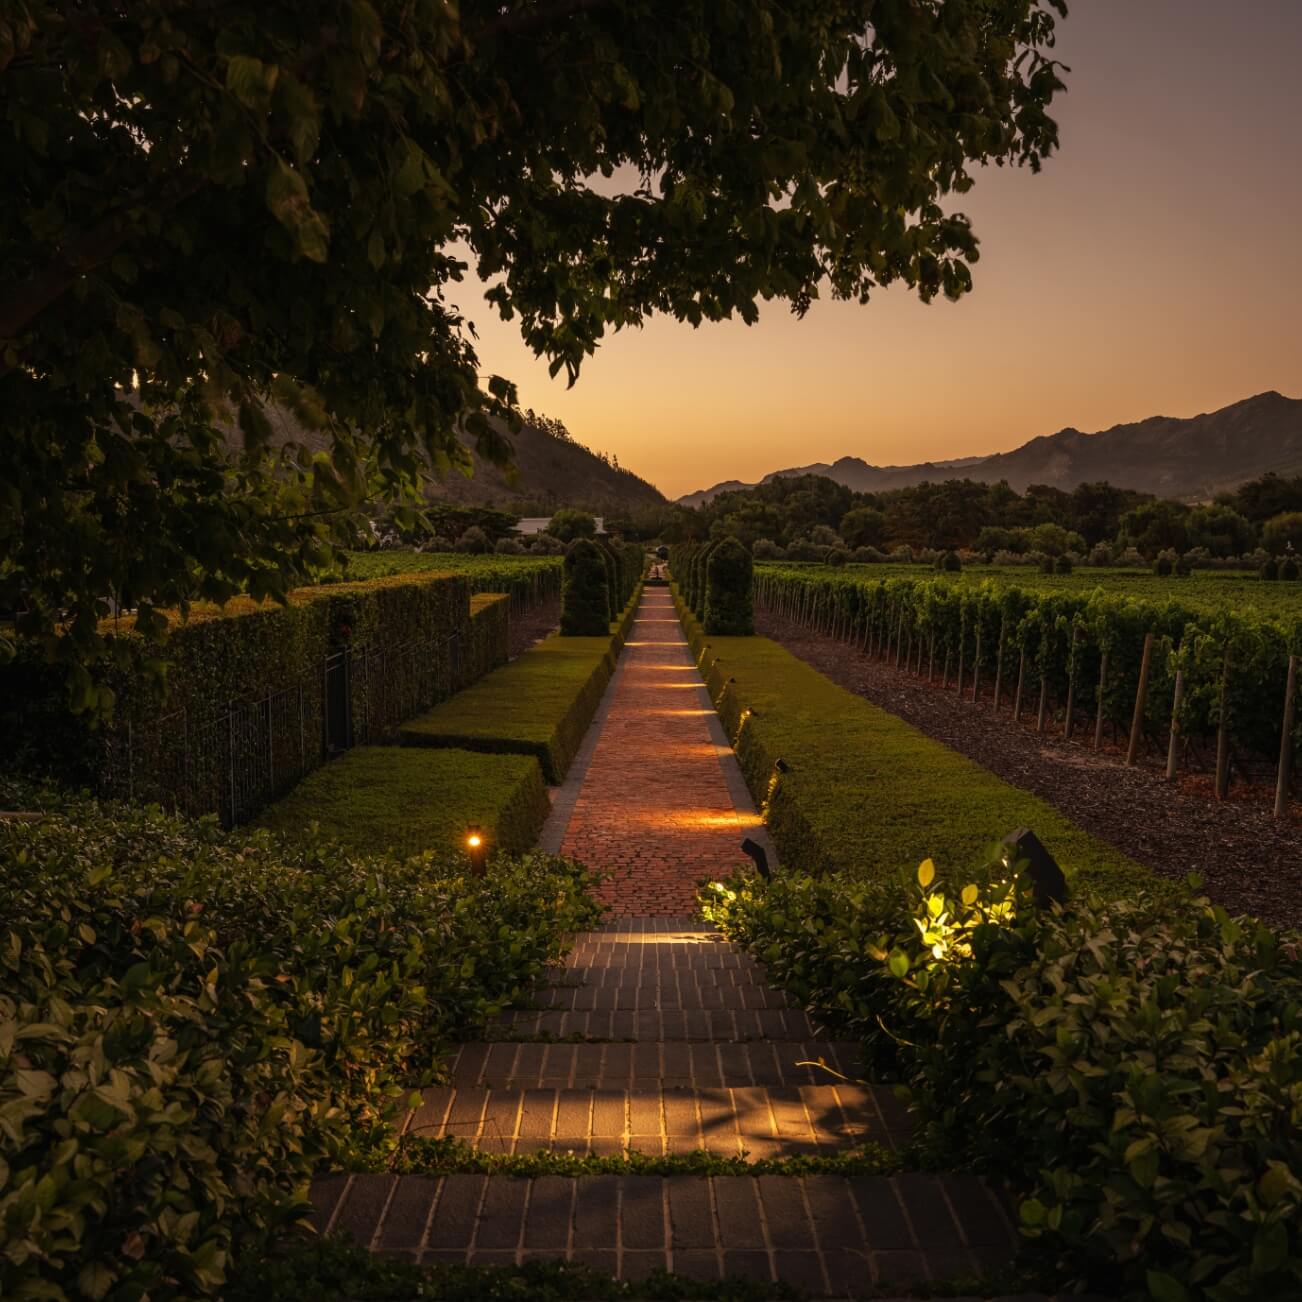 Resident guests at Leeu Estates can enjoy an evening stroll through the manicured grounds